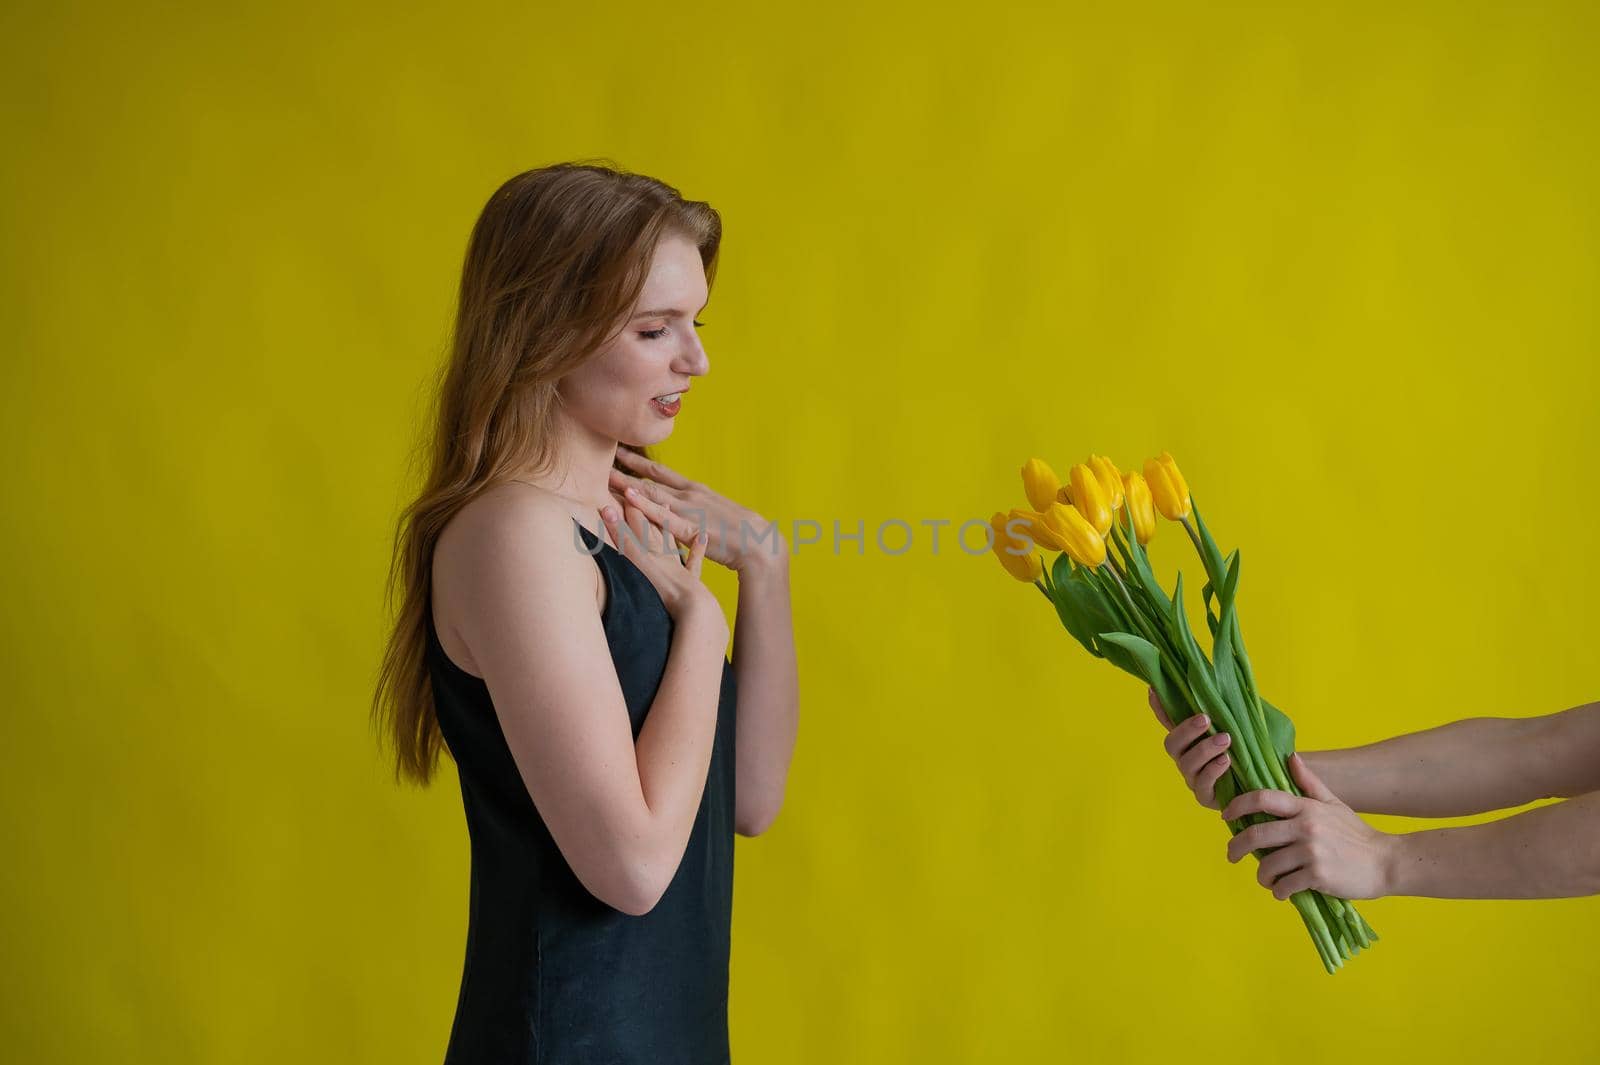 Caucasian woman accepts tulips as a gift on yellow background. by mrwed54